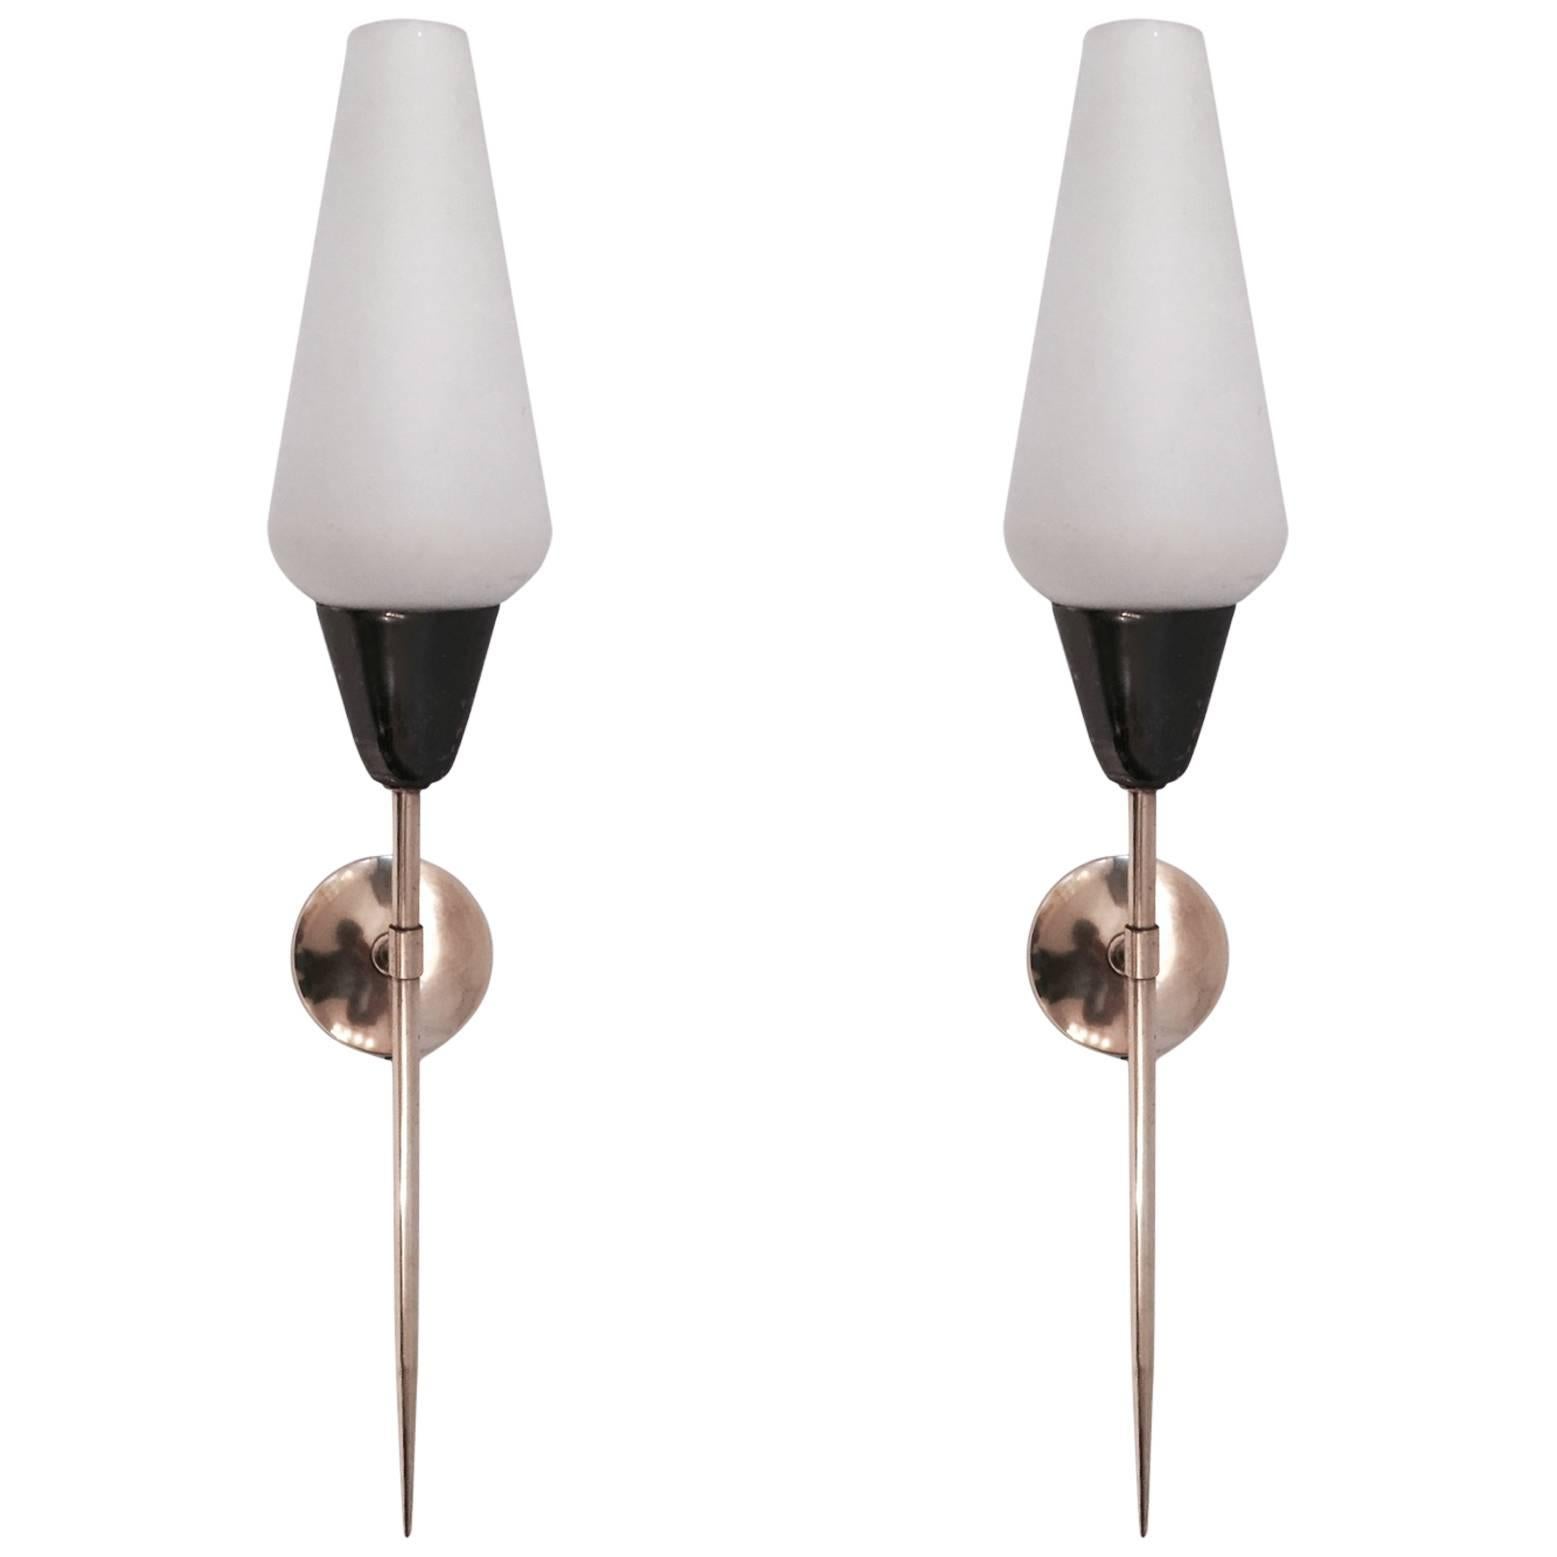 Pair of 1950s "Flare" Sconces by Maison Lunel